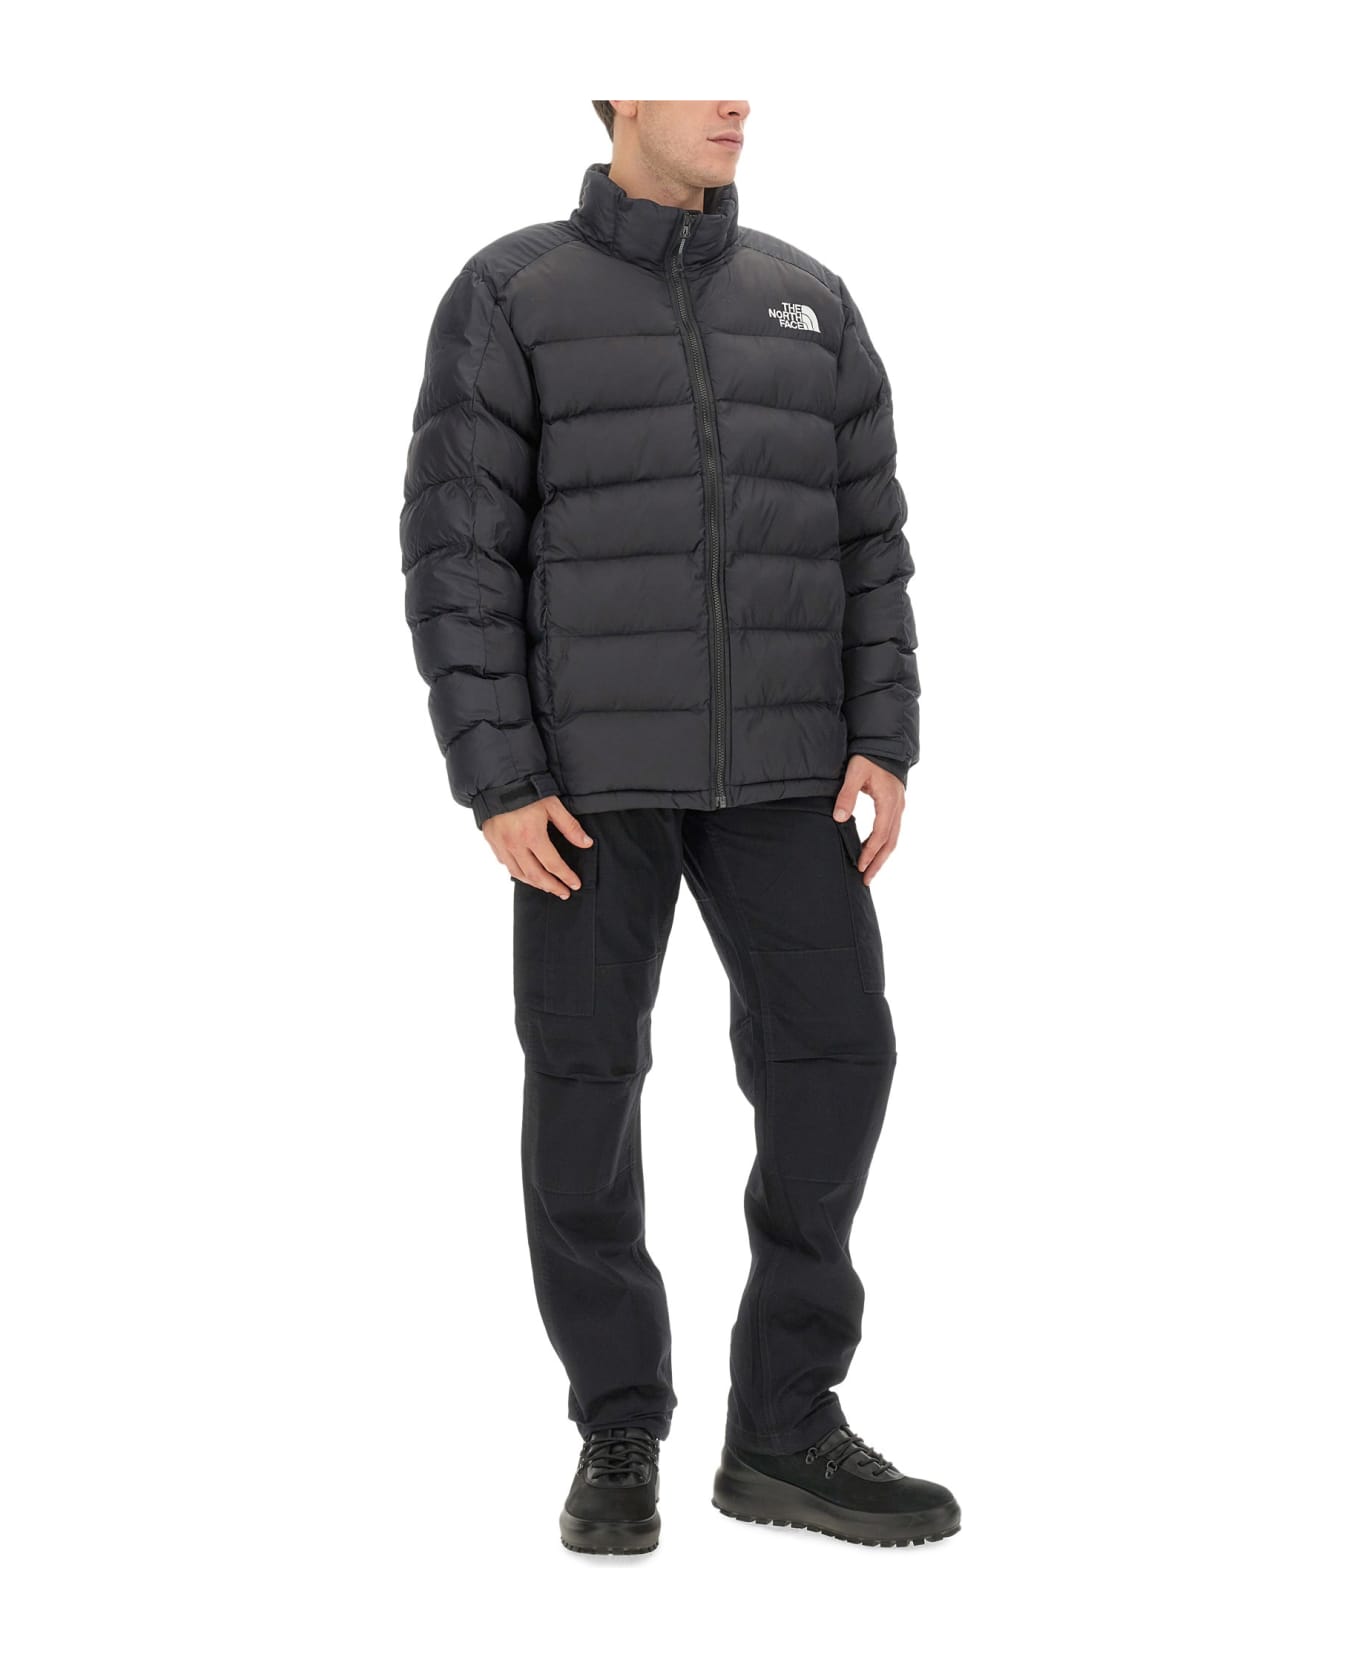 The North Face Jacket With Logo Print - Black